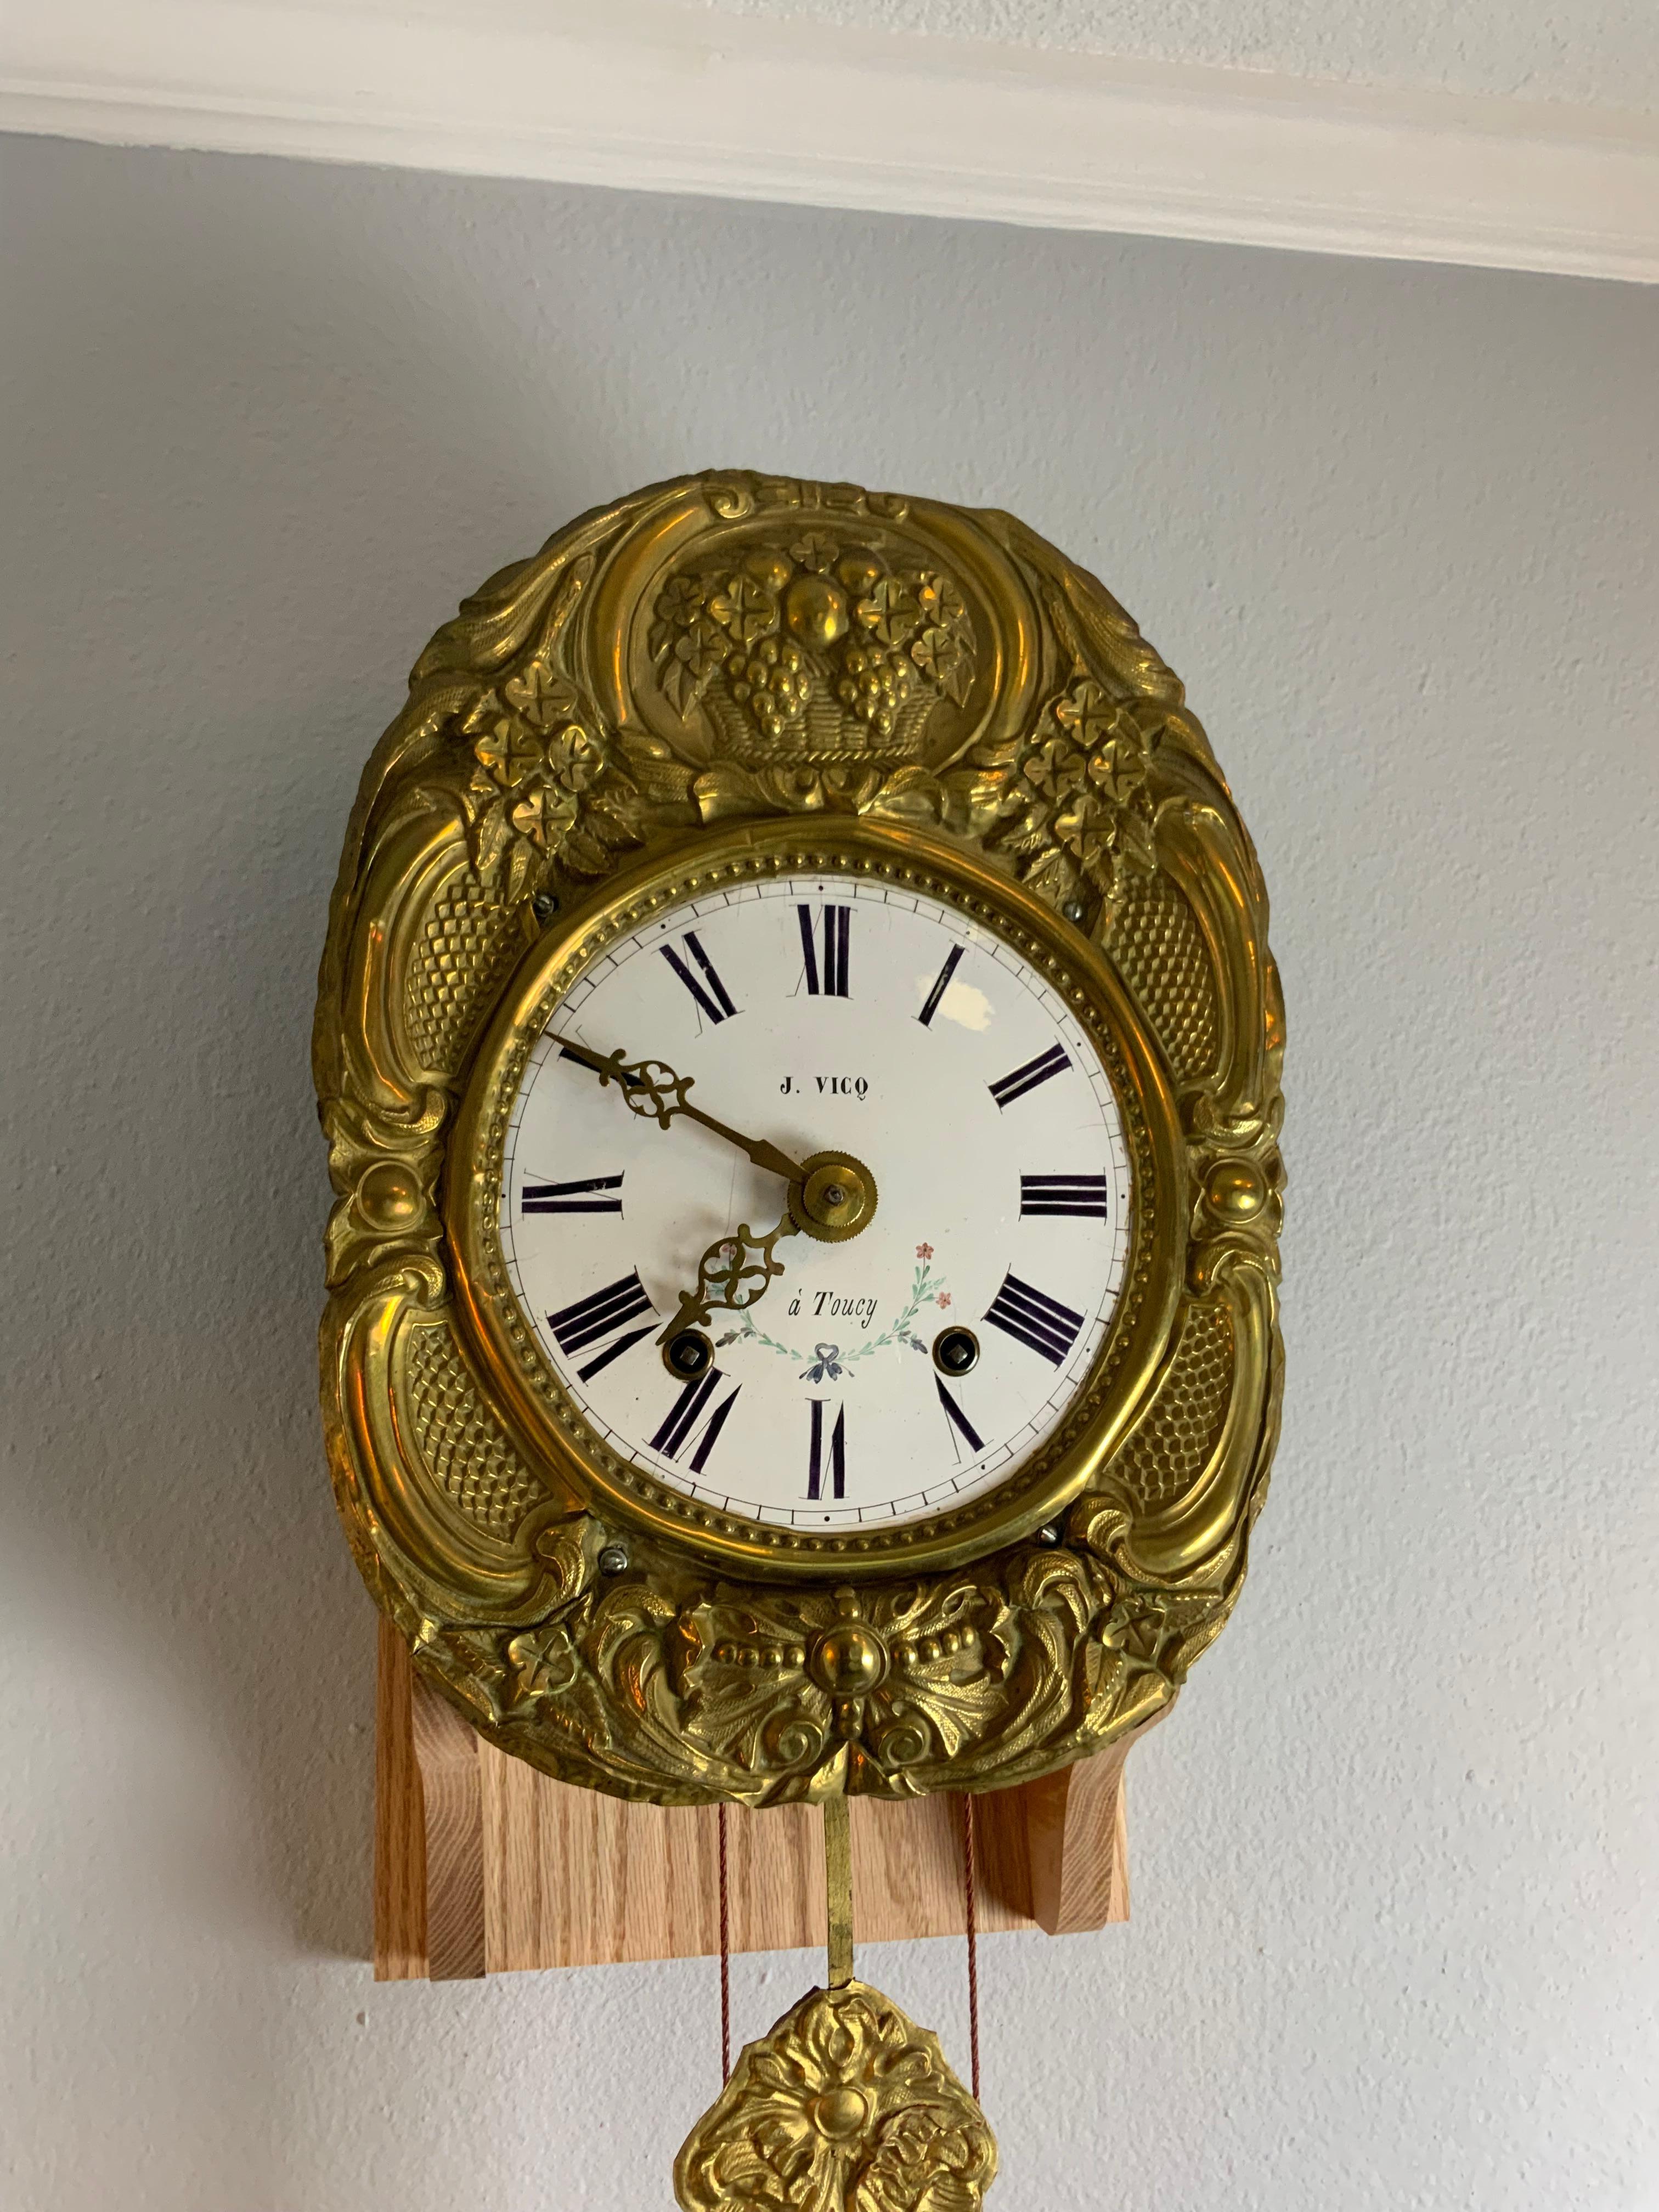 Morbier wall clock movement with the weights, key and balance. Strikes on the hour and two minutes after and on the half hour.  This clock has just been professionally cleaned and serviced and runs very well and keeps great time.  Some minor dents